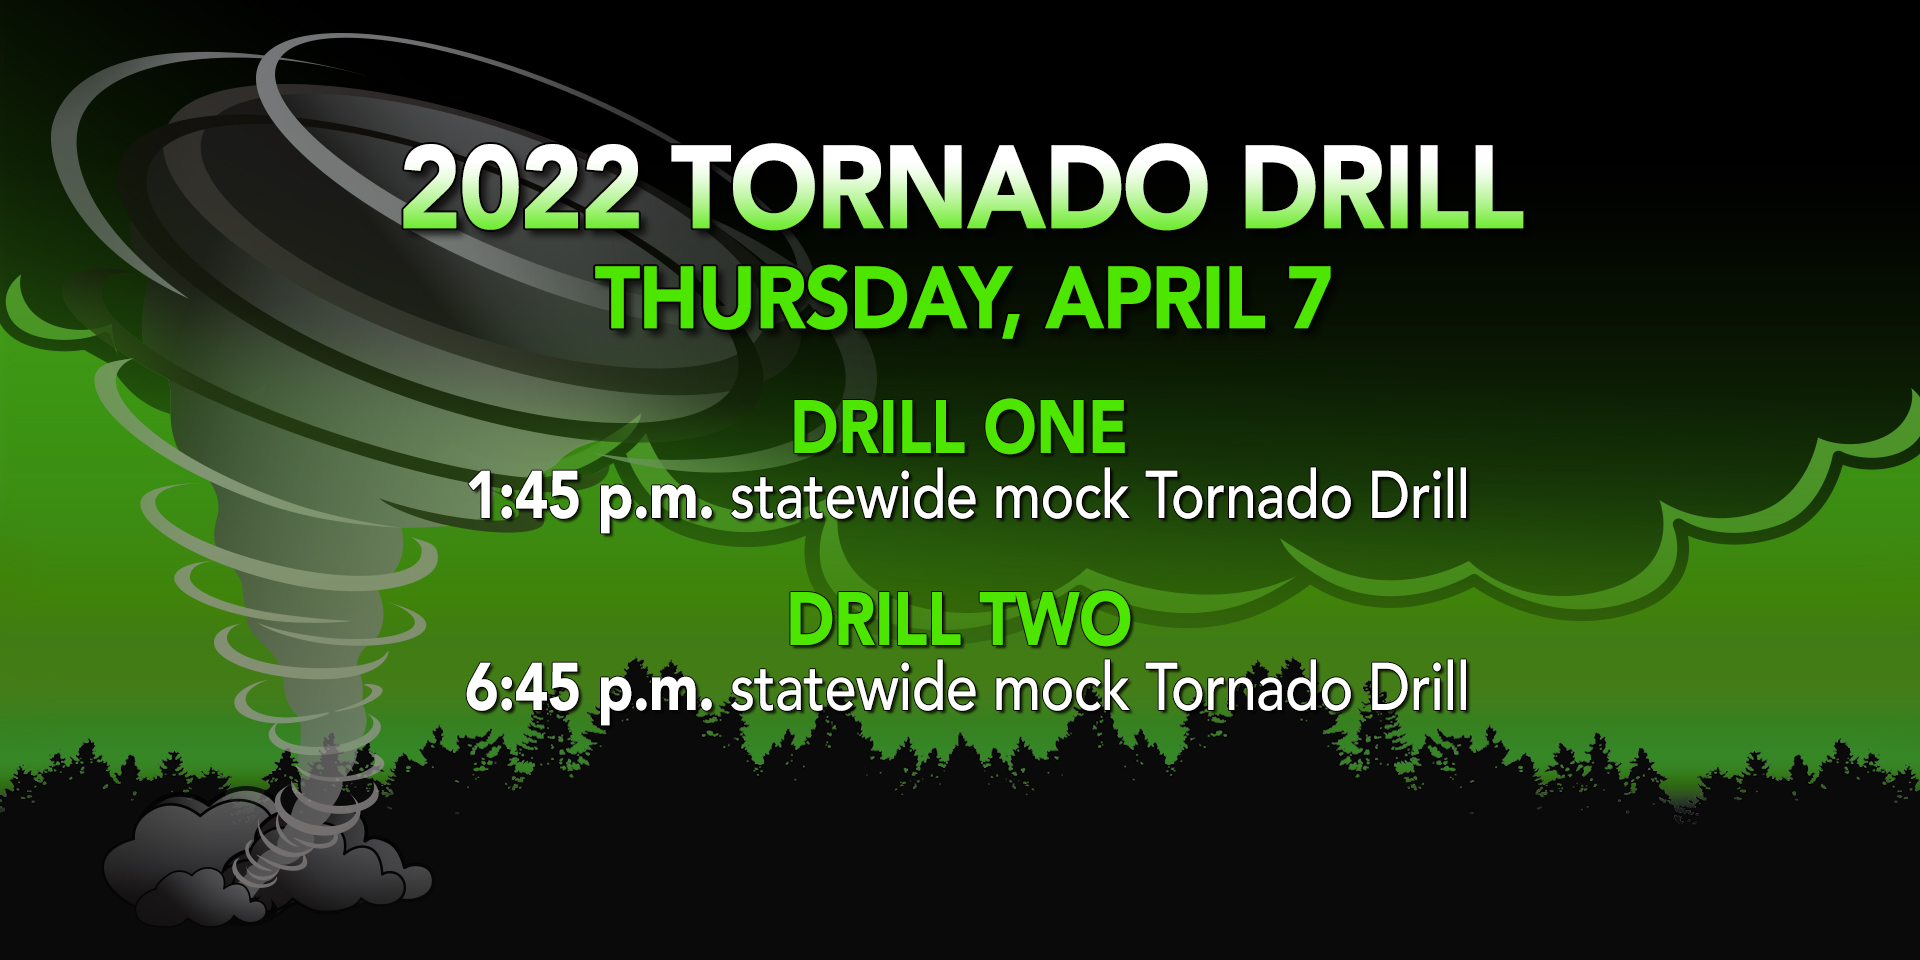 Carver County S.O. on Twitter "Today is Tornado Drill Day. County